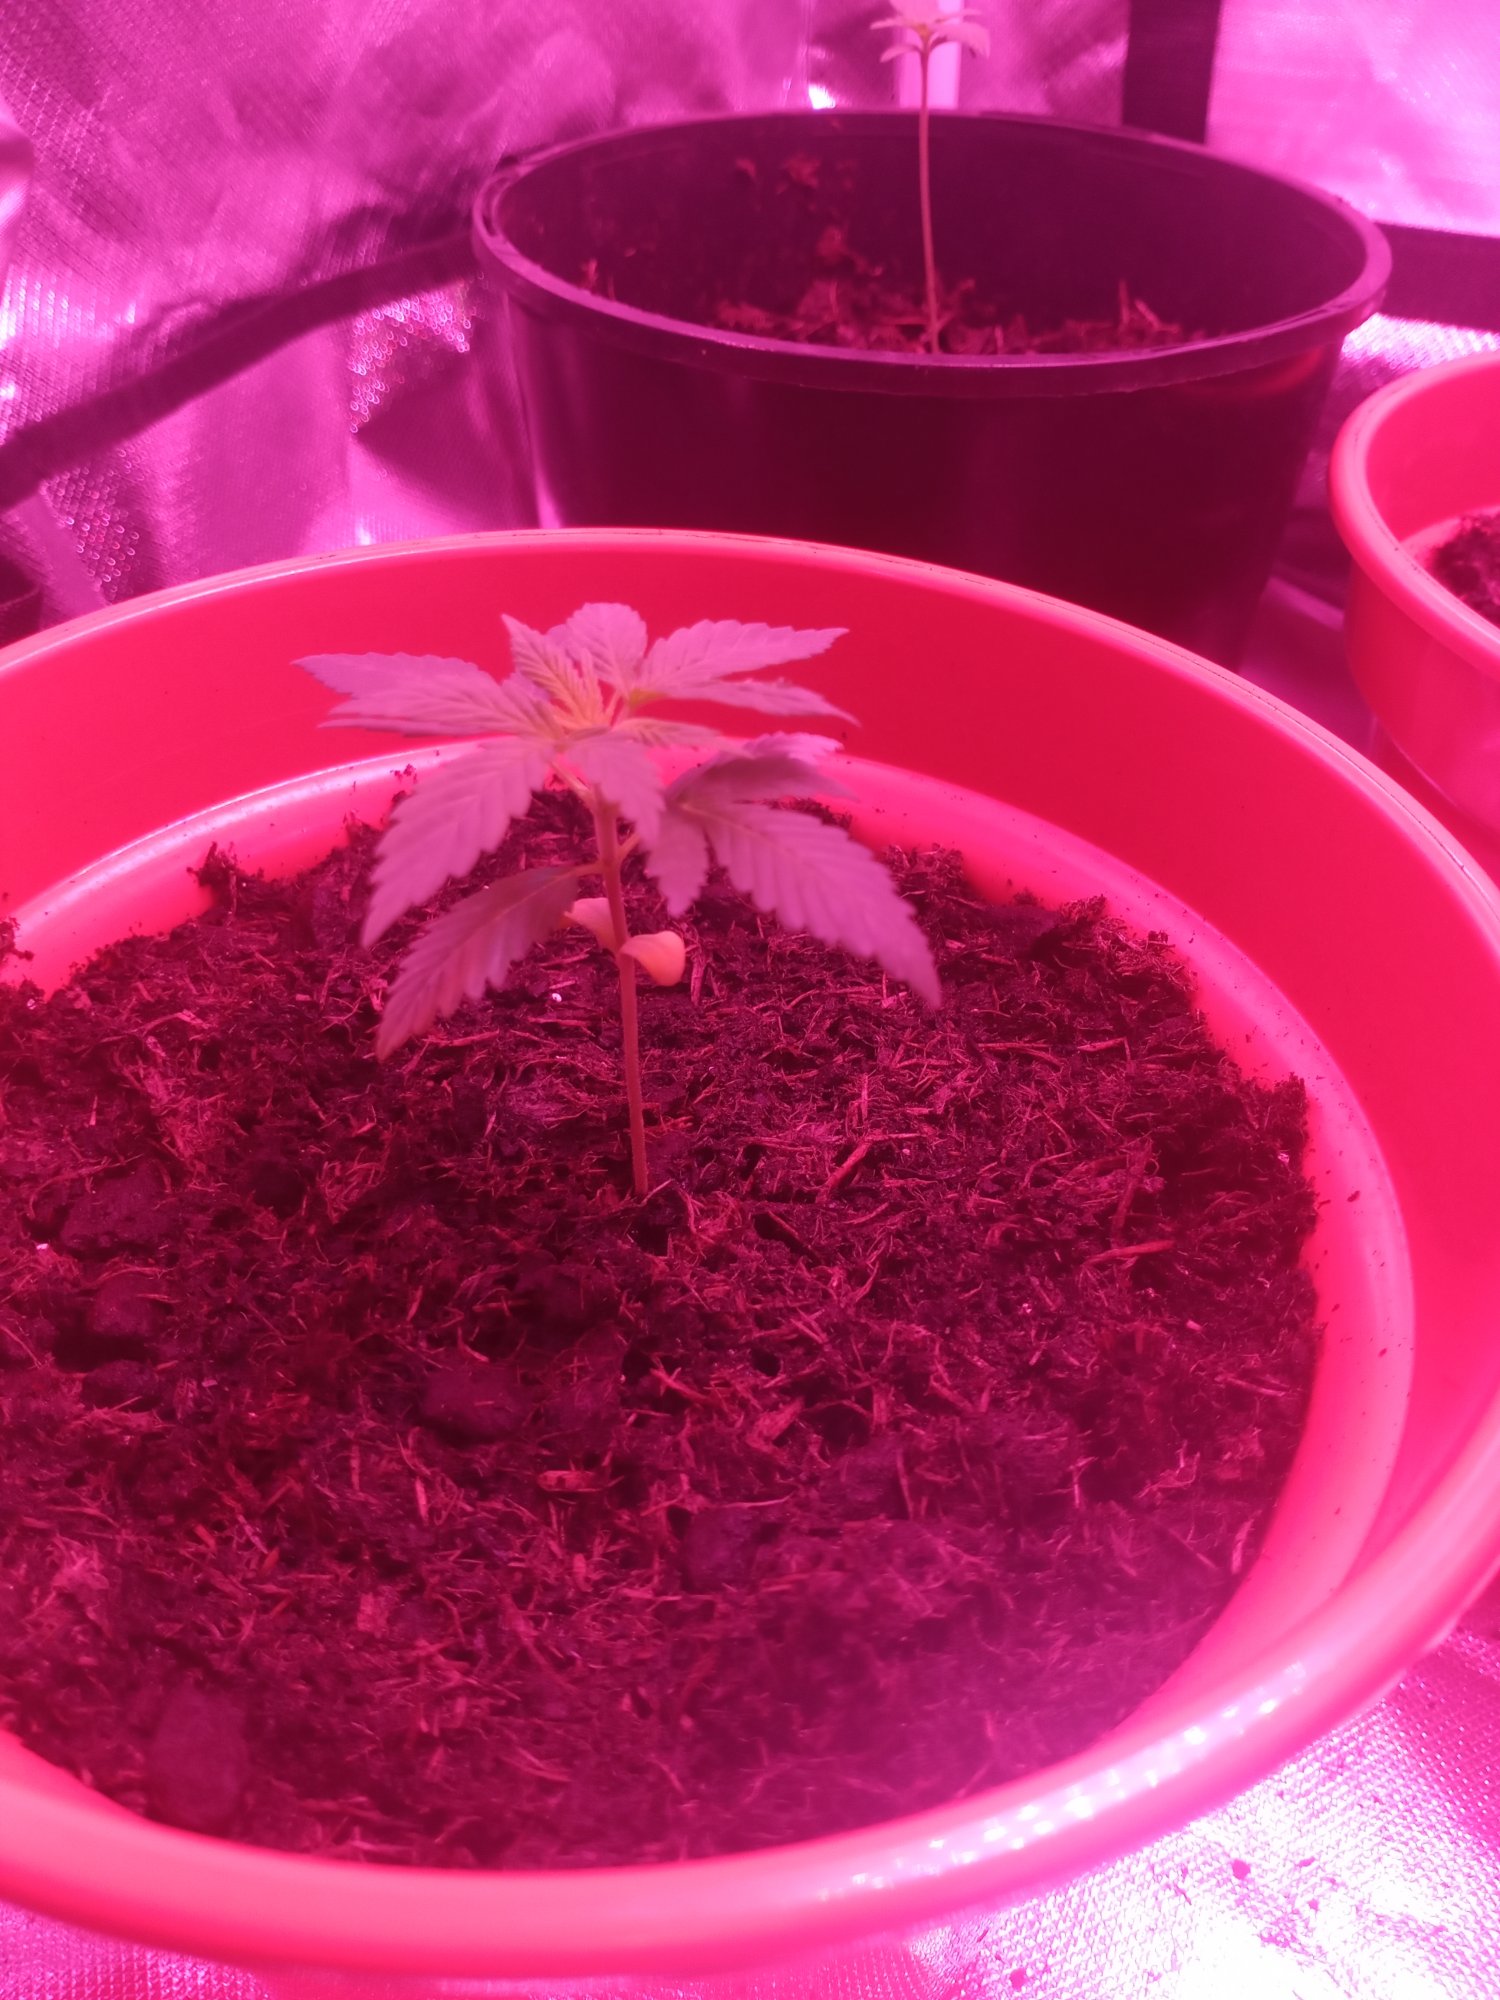 Need advice entering 3rd week of my first grow 2